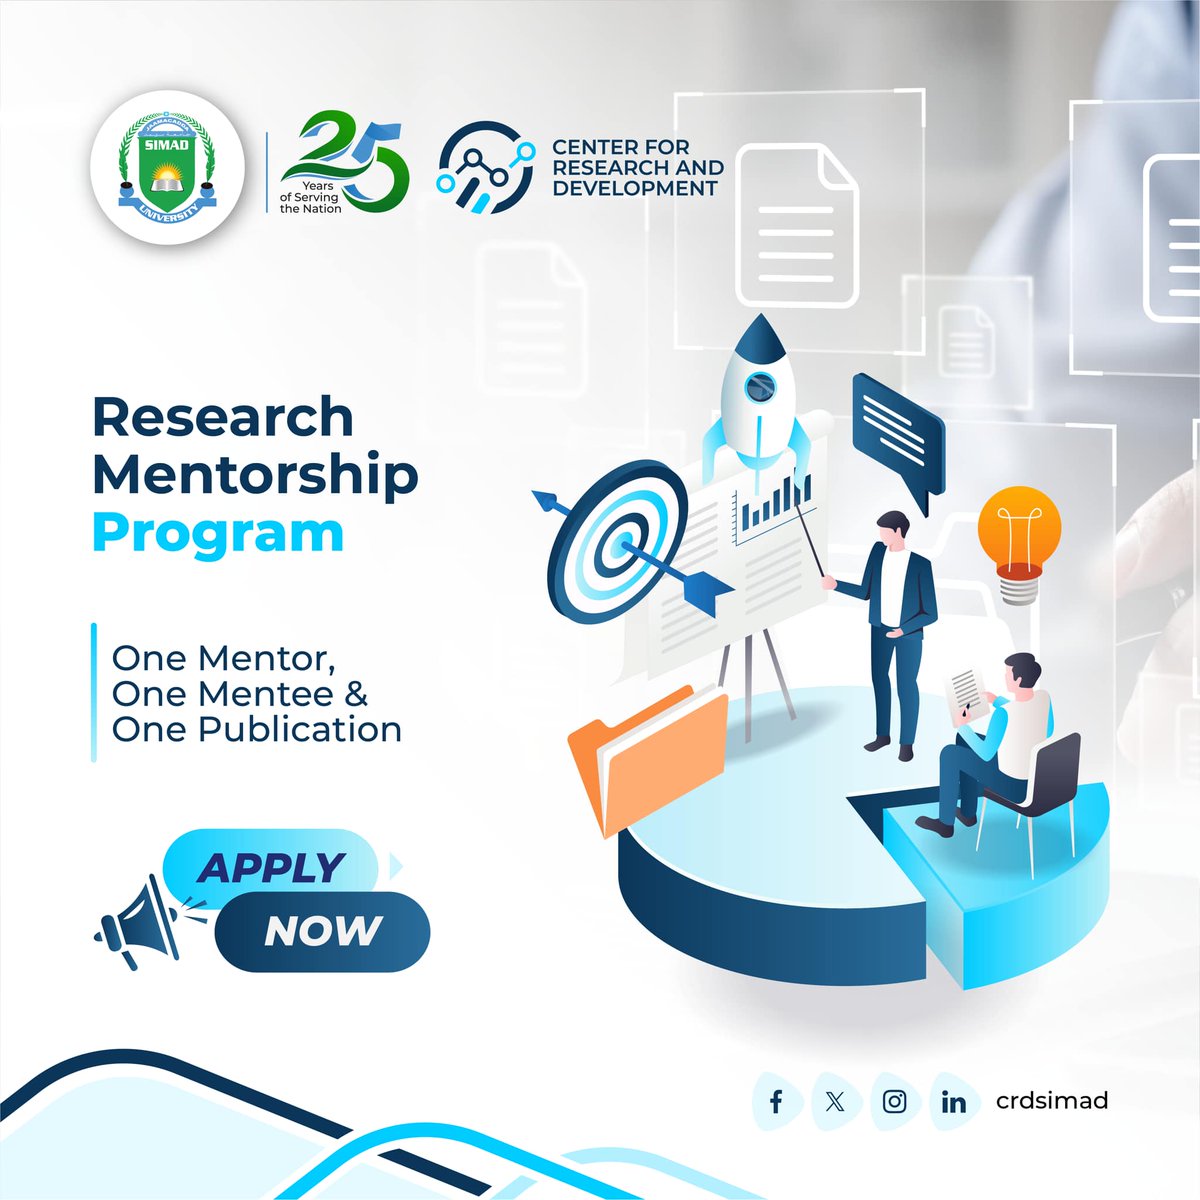 Our Center for Research and Development is excited to announce a new initiative: Research Mentorship Program! This one-to-one mentorship program is designed to pair mentors with mentees to facilitate publication in Scopus/ISI indexed journals. Interested in learning more? Click…